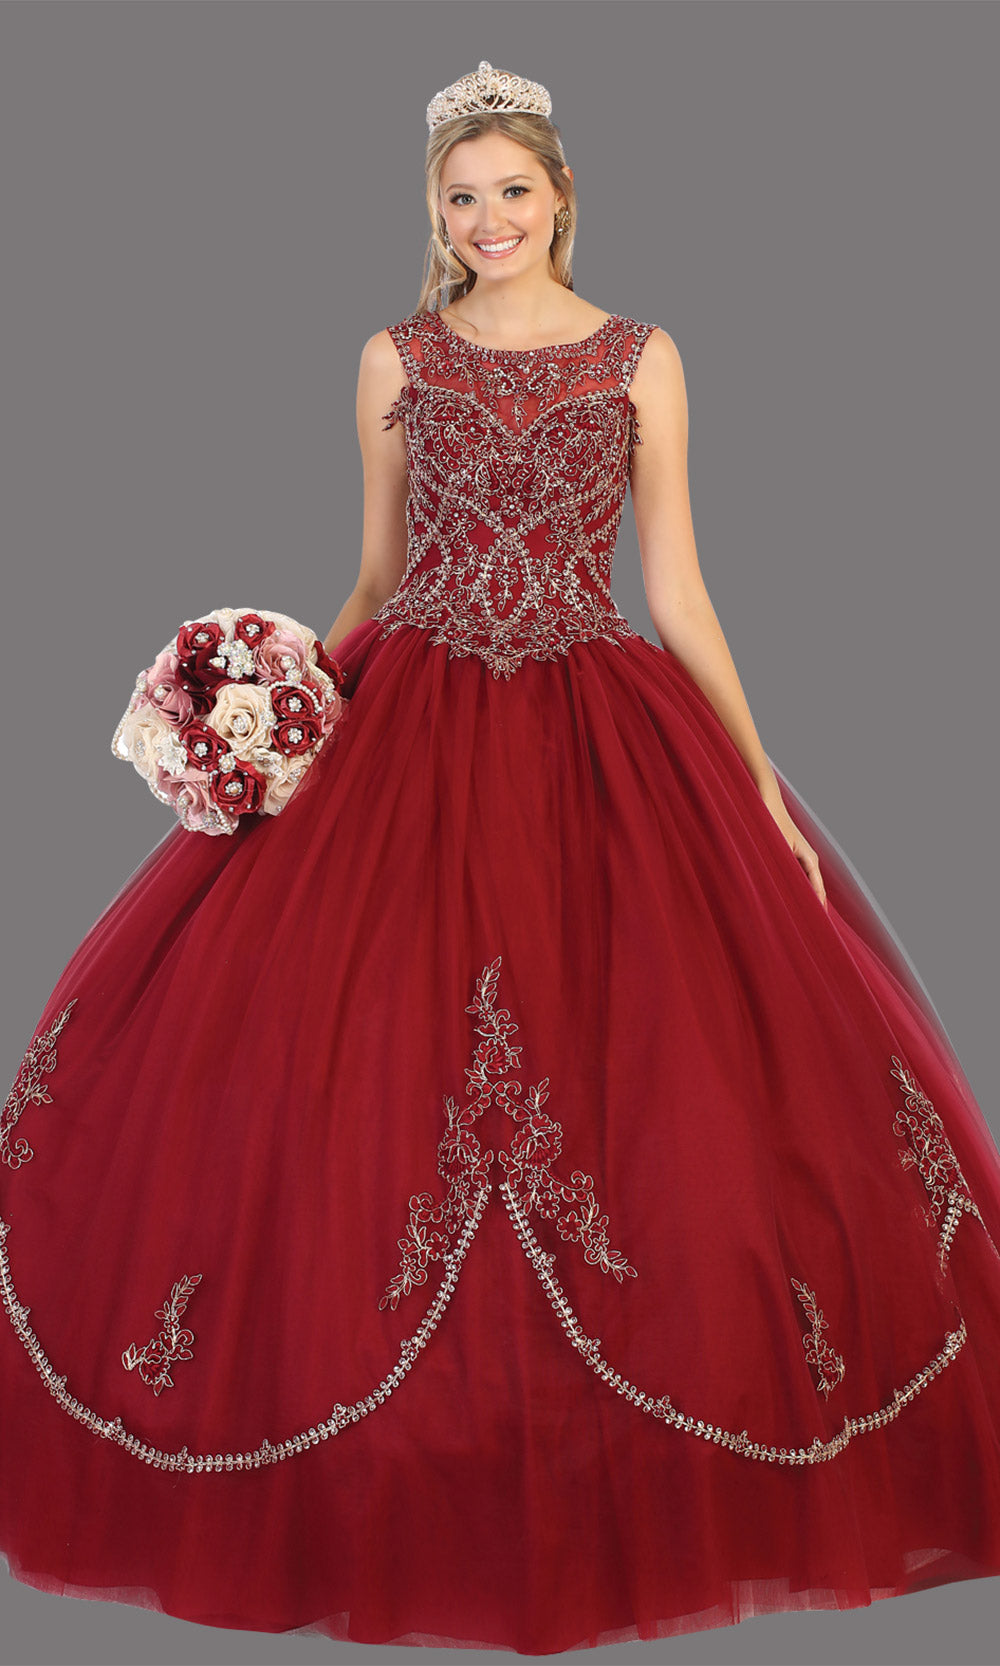 Mayqueen LK130 burgundy red quinceanera high neck ball gown w/sequin detail. Dark red ball gown is perfect for engagement dress, wedding reception, indowestern party gown, sweet 16, debut, sweet 15, sweet 18. Plus sizes available for ballgowns.jpg